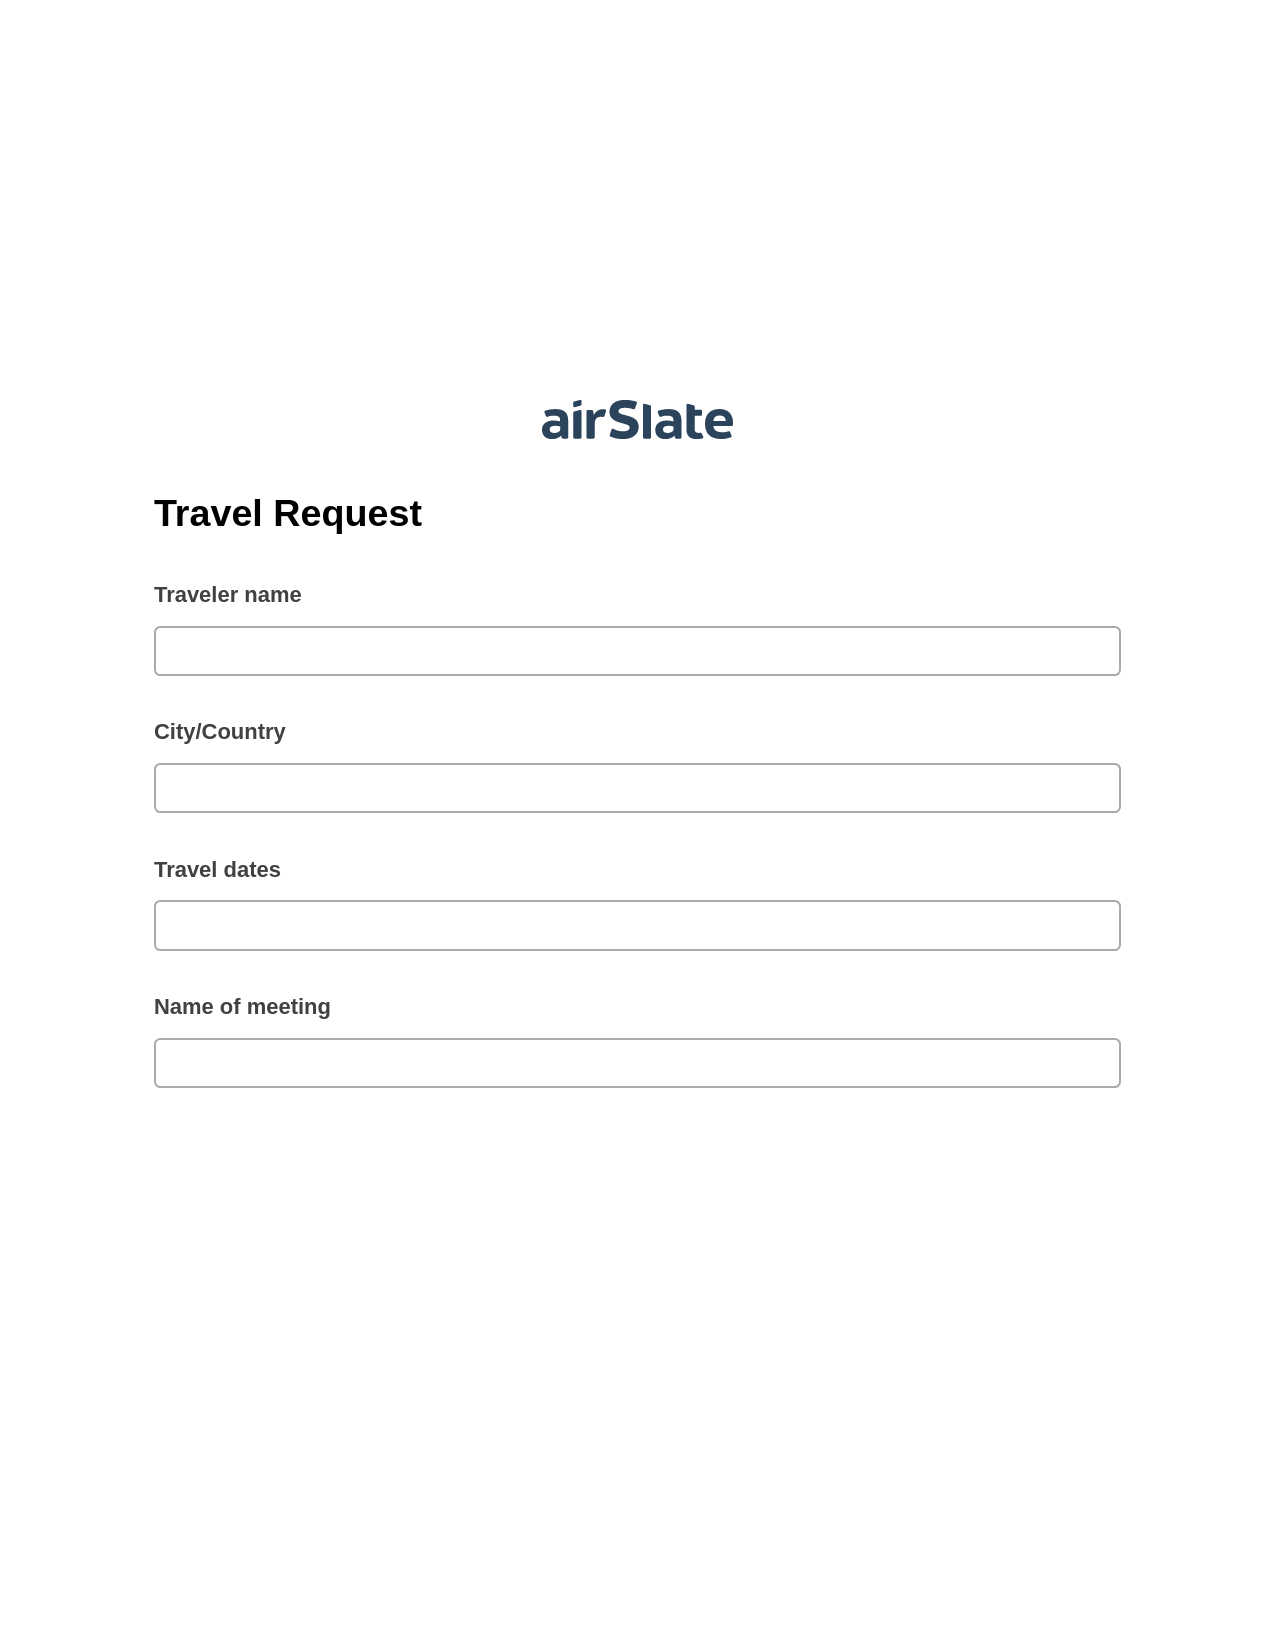 Travel Request Pre-fill from CSV File Bot, Reminder Bot, Slack Two-Way Binding Bot